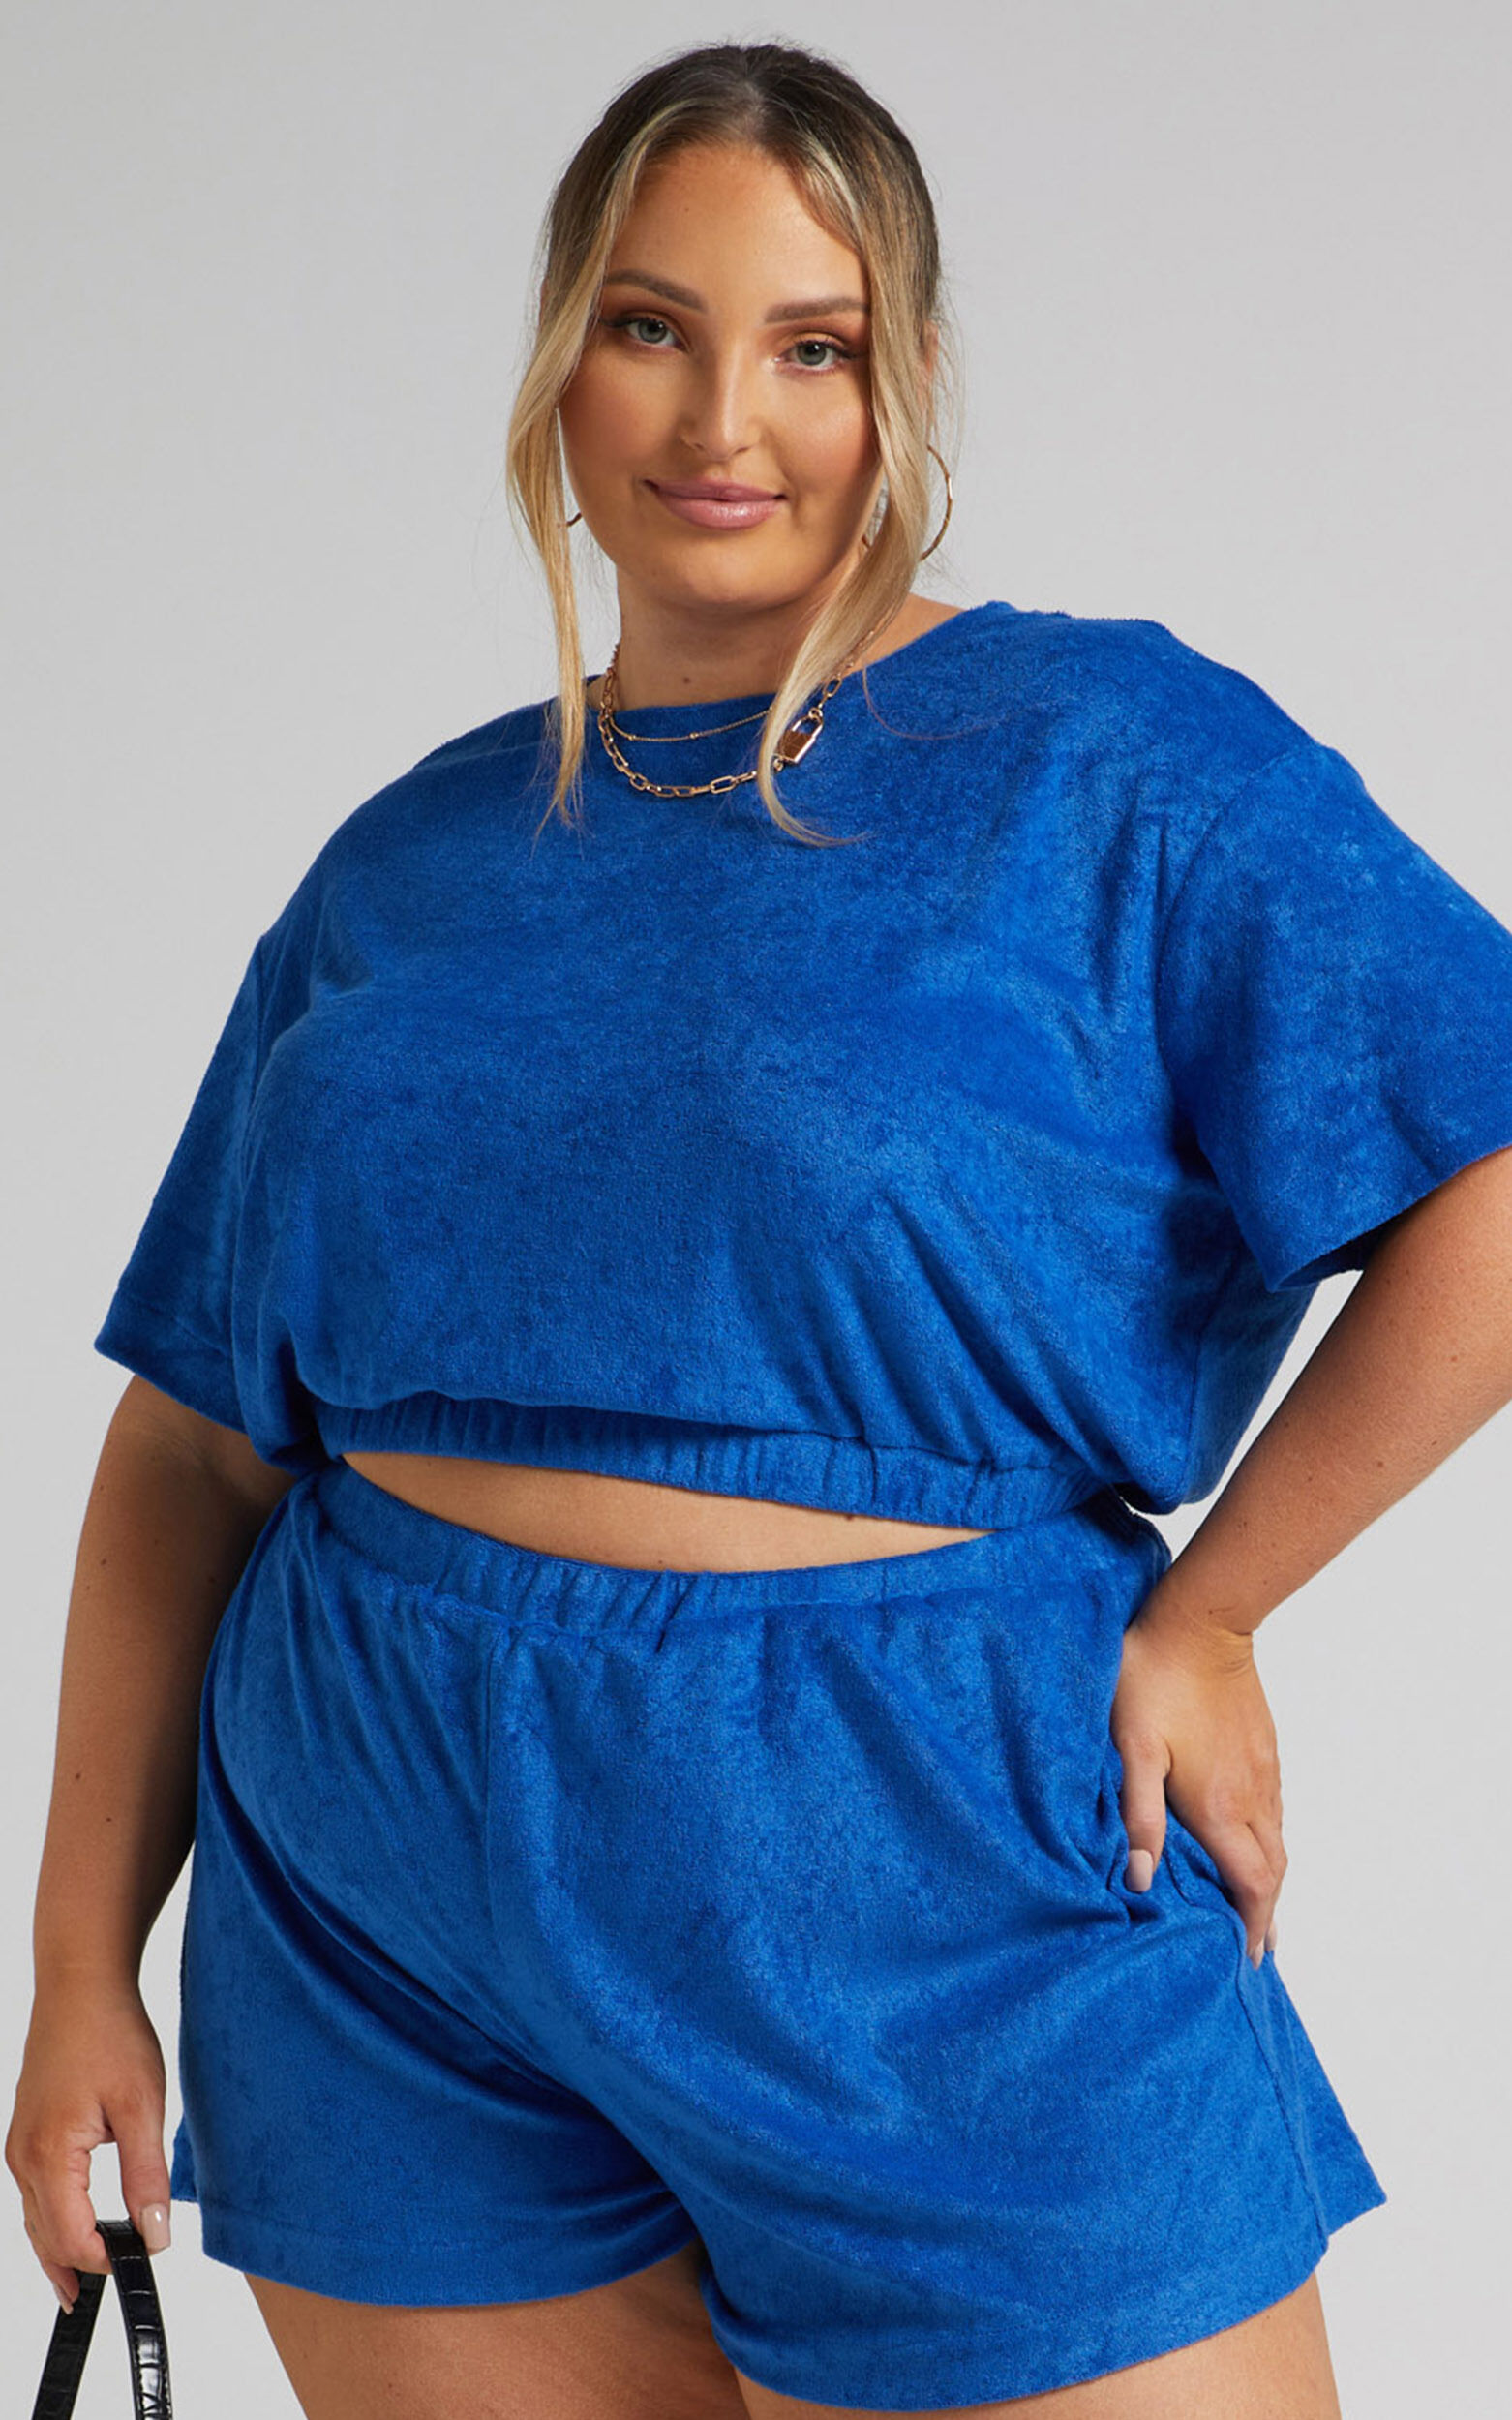 Broditha Terry Towelling Crew Neck Top in Blue - 04, BLU1, super-hi-res image number null